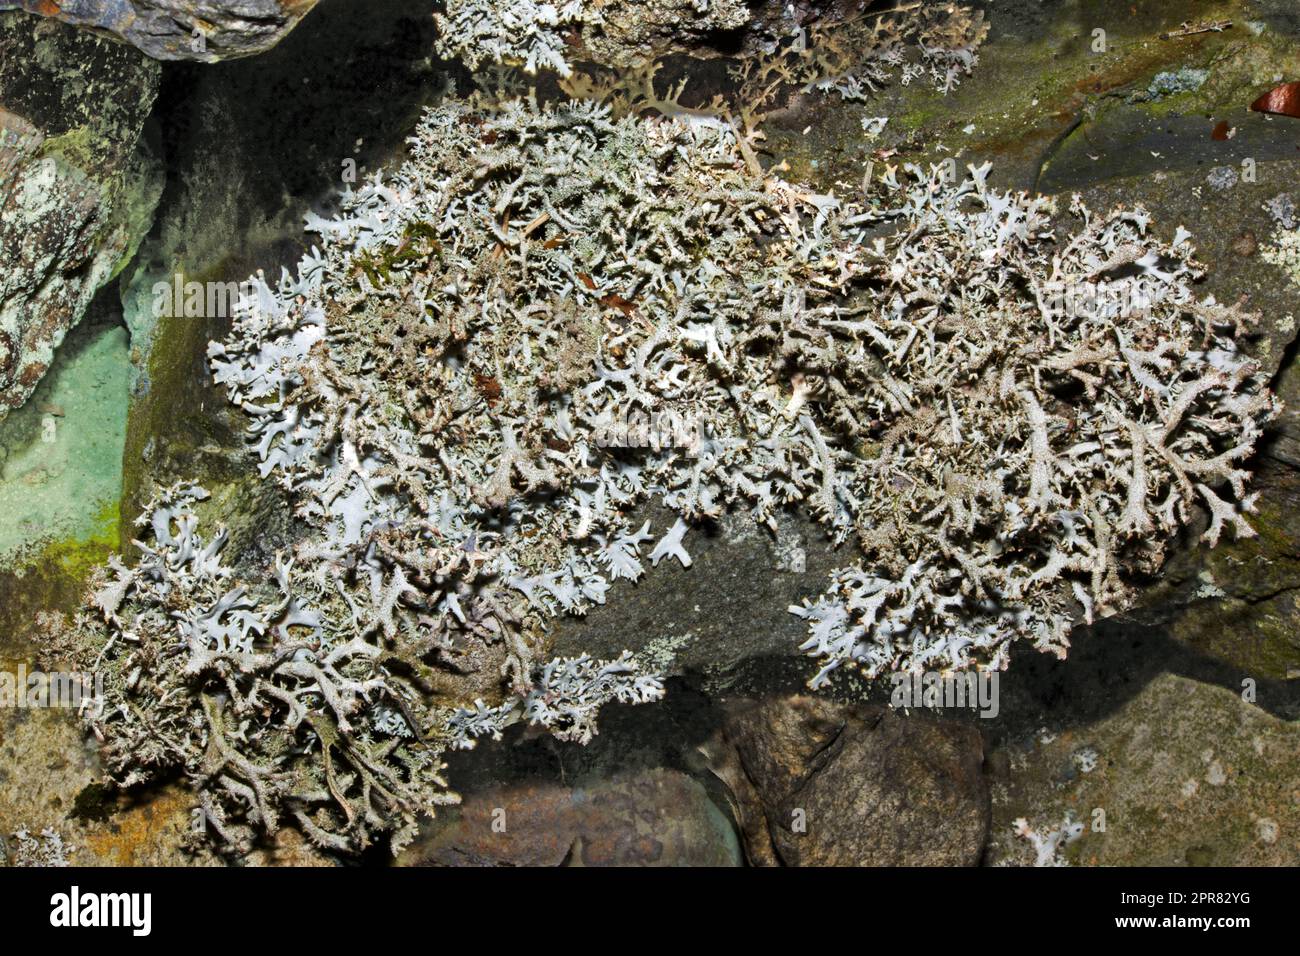 Pseudevernia furfuracea (tree moss) is foliose lichen found in upland areas on siliceous rocks and acid-barked trees. It is widely distributed. Stock Photo